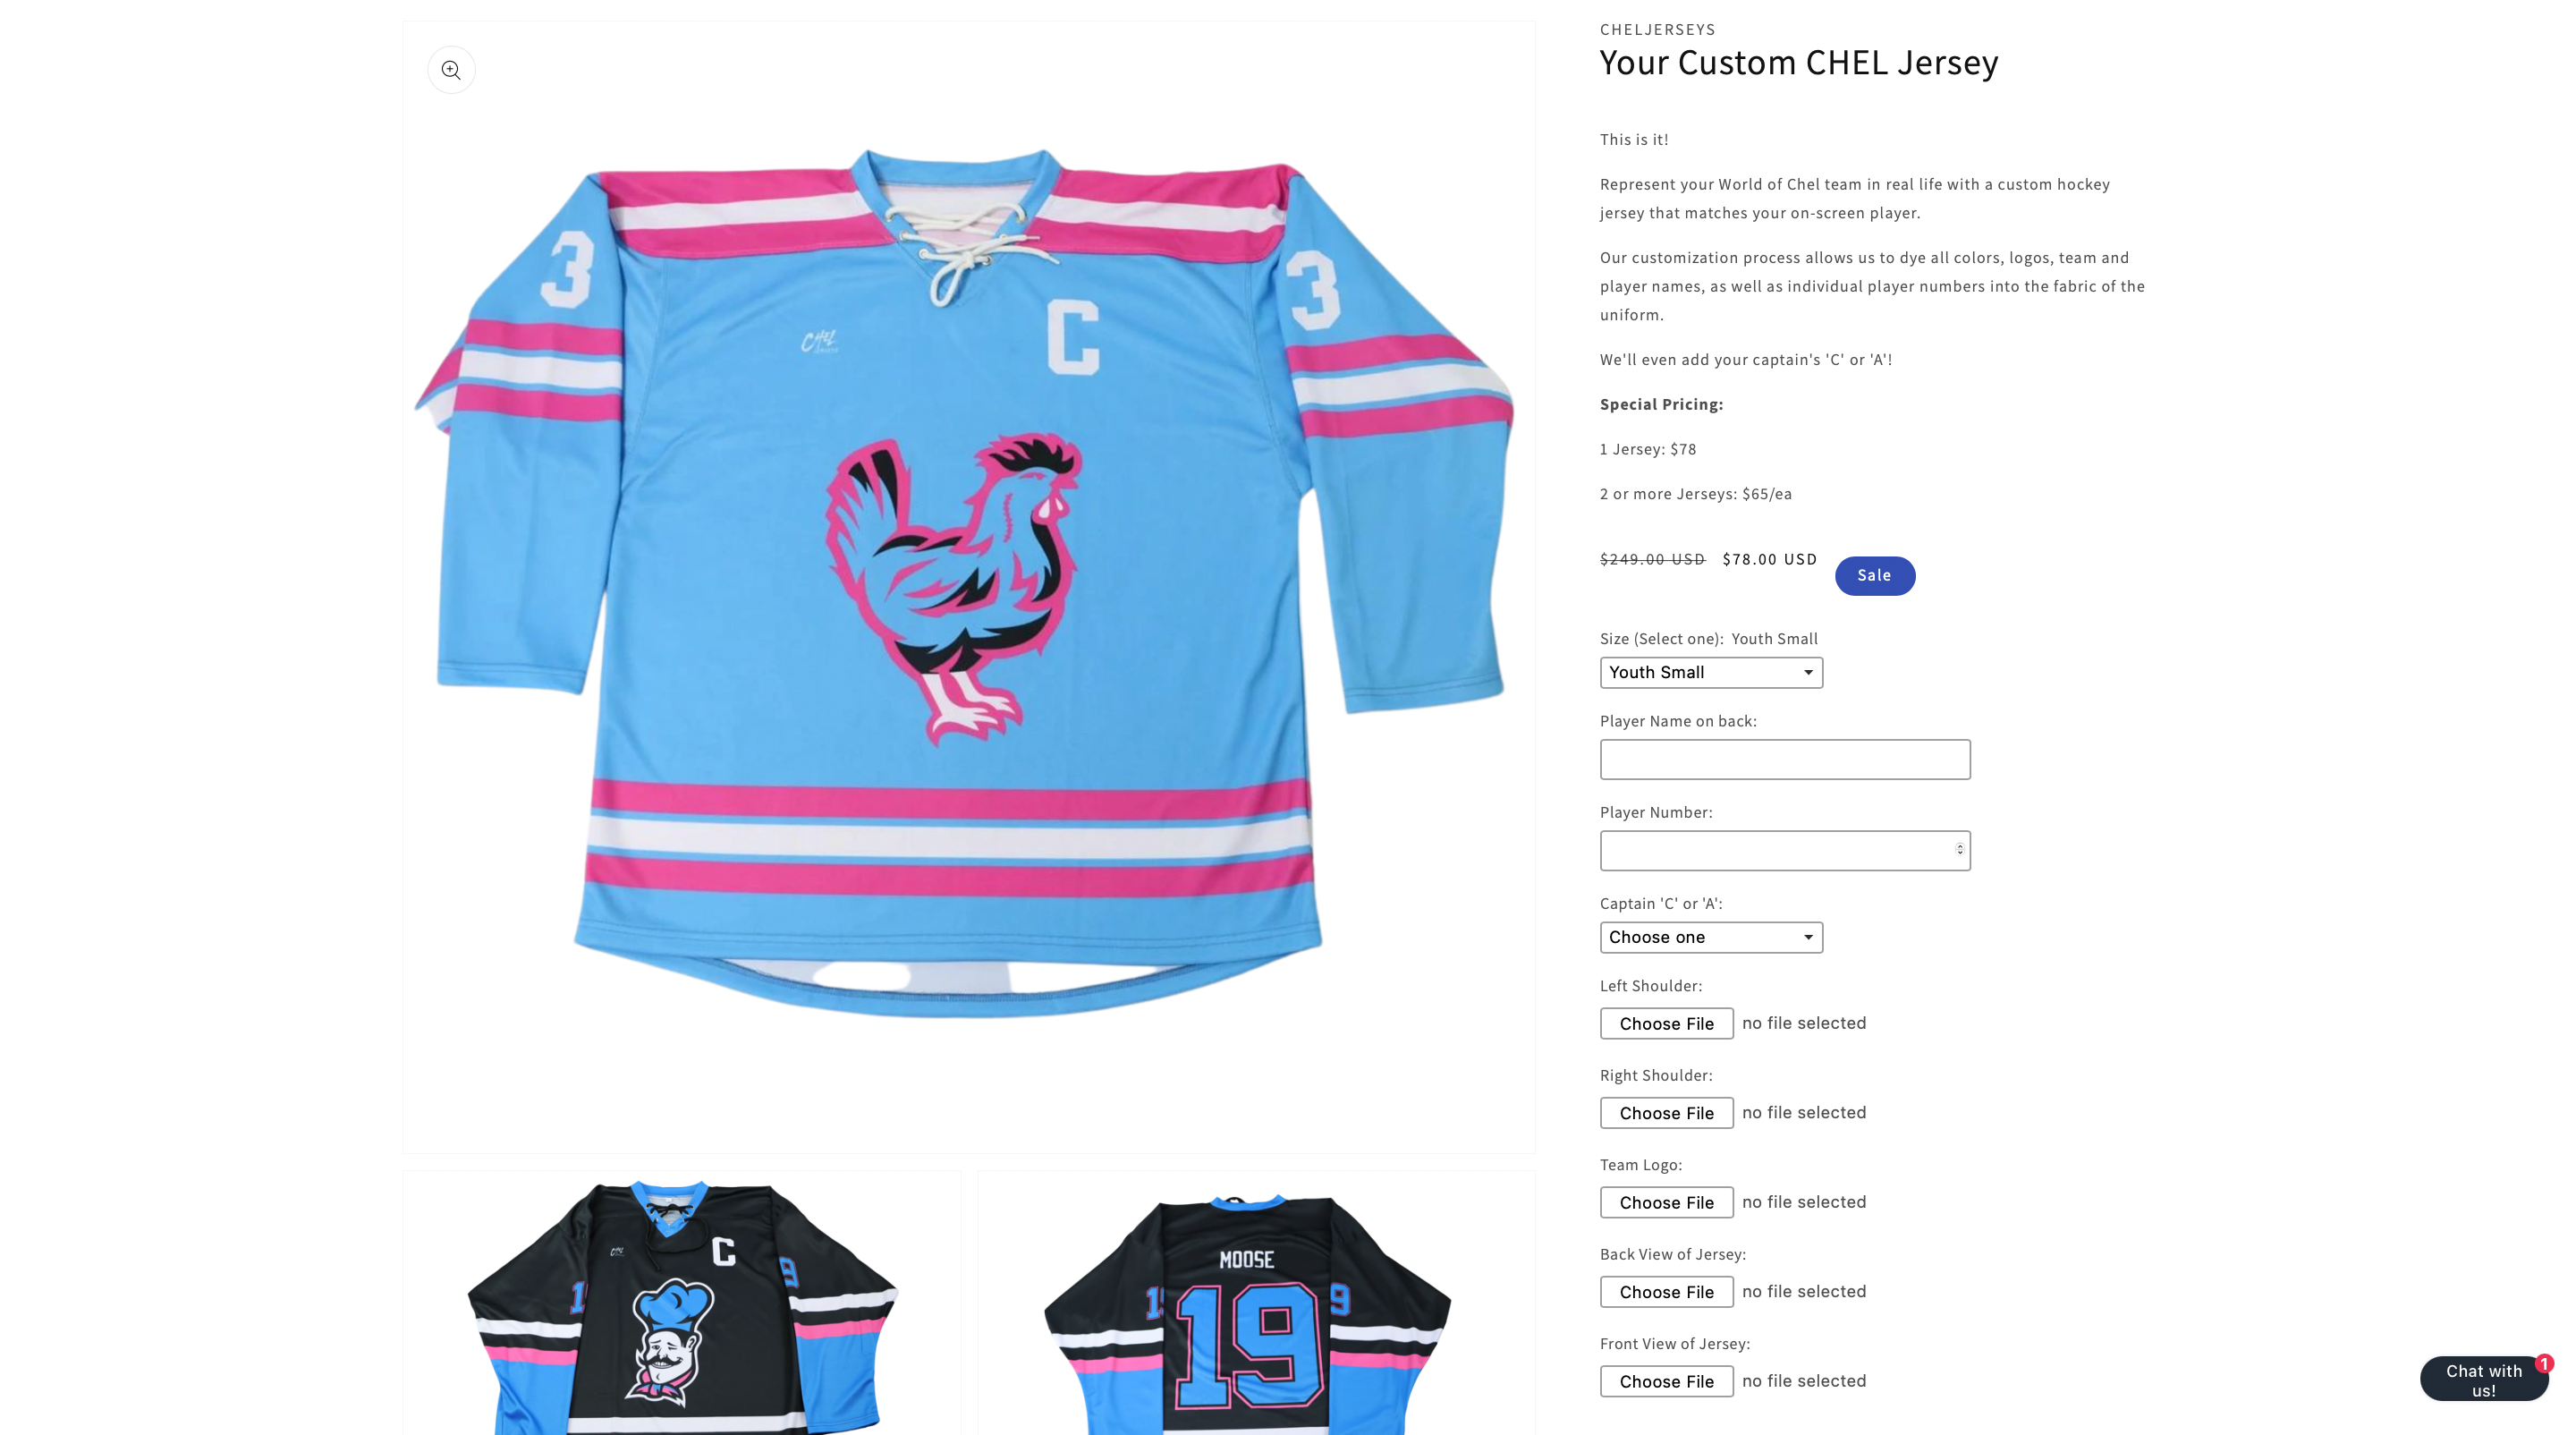 CHEL Jerseys NHL Video Game Jerseys to Real Life